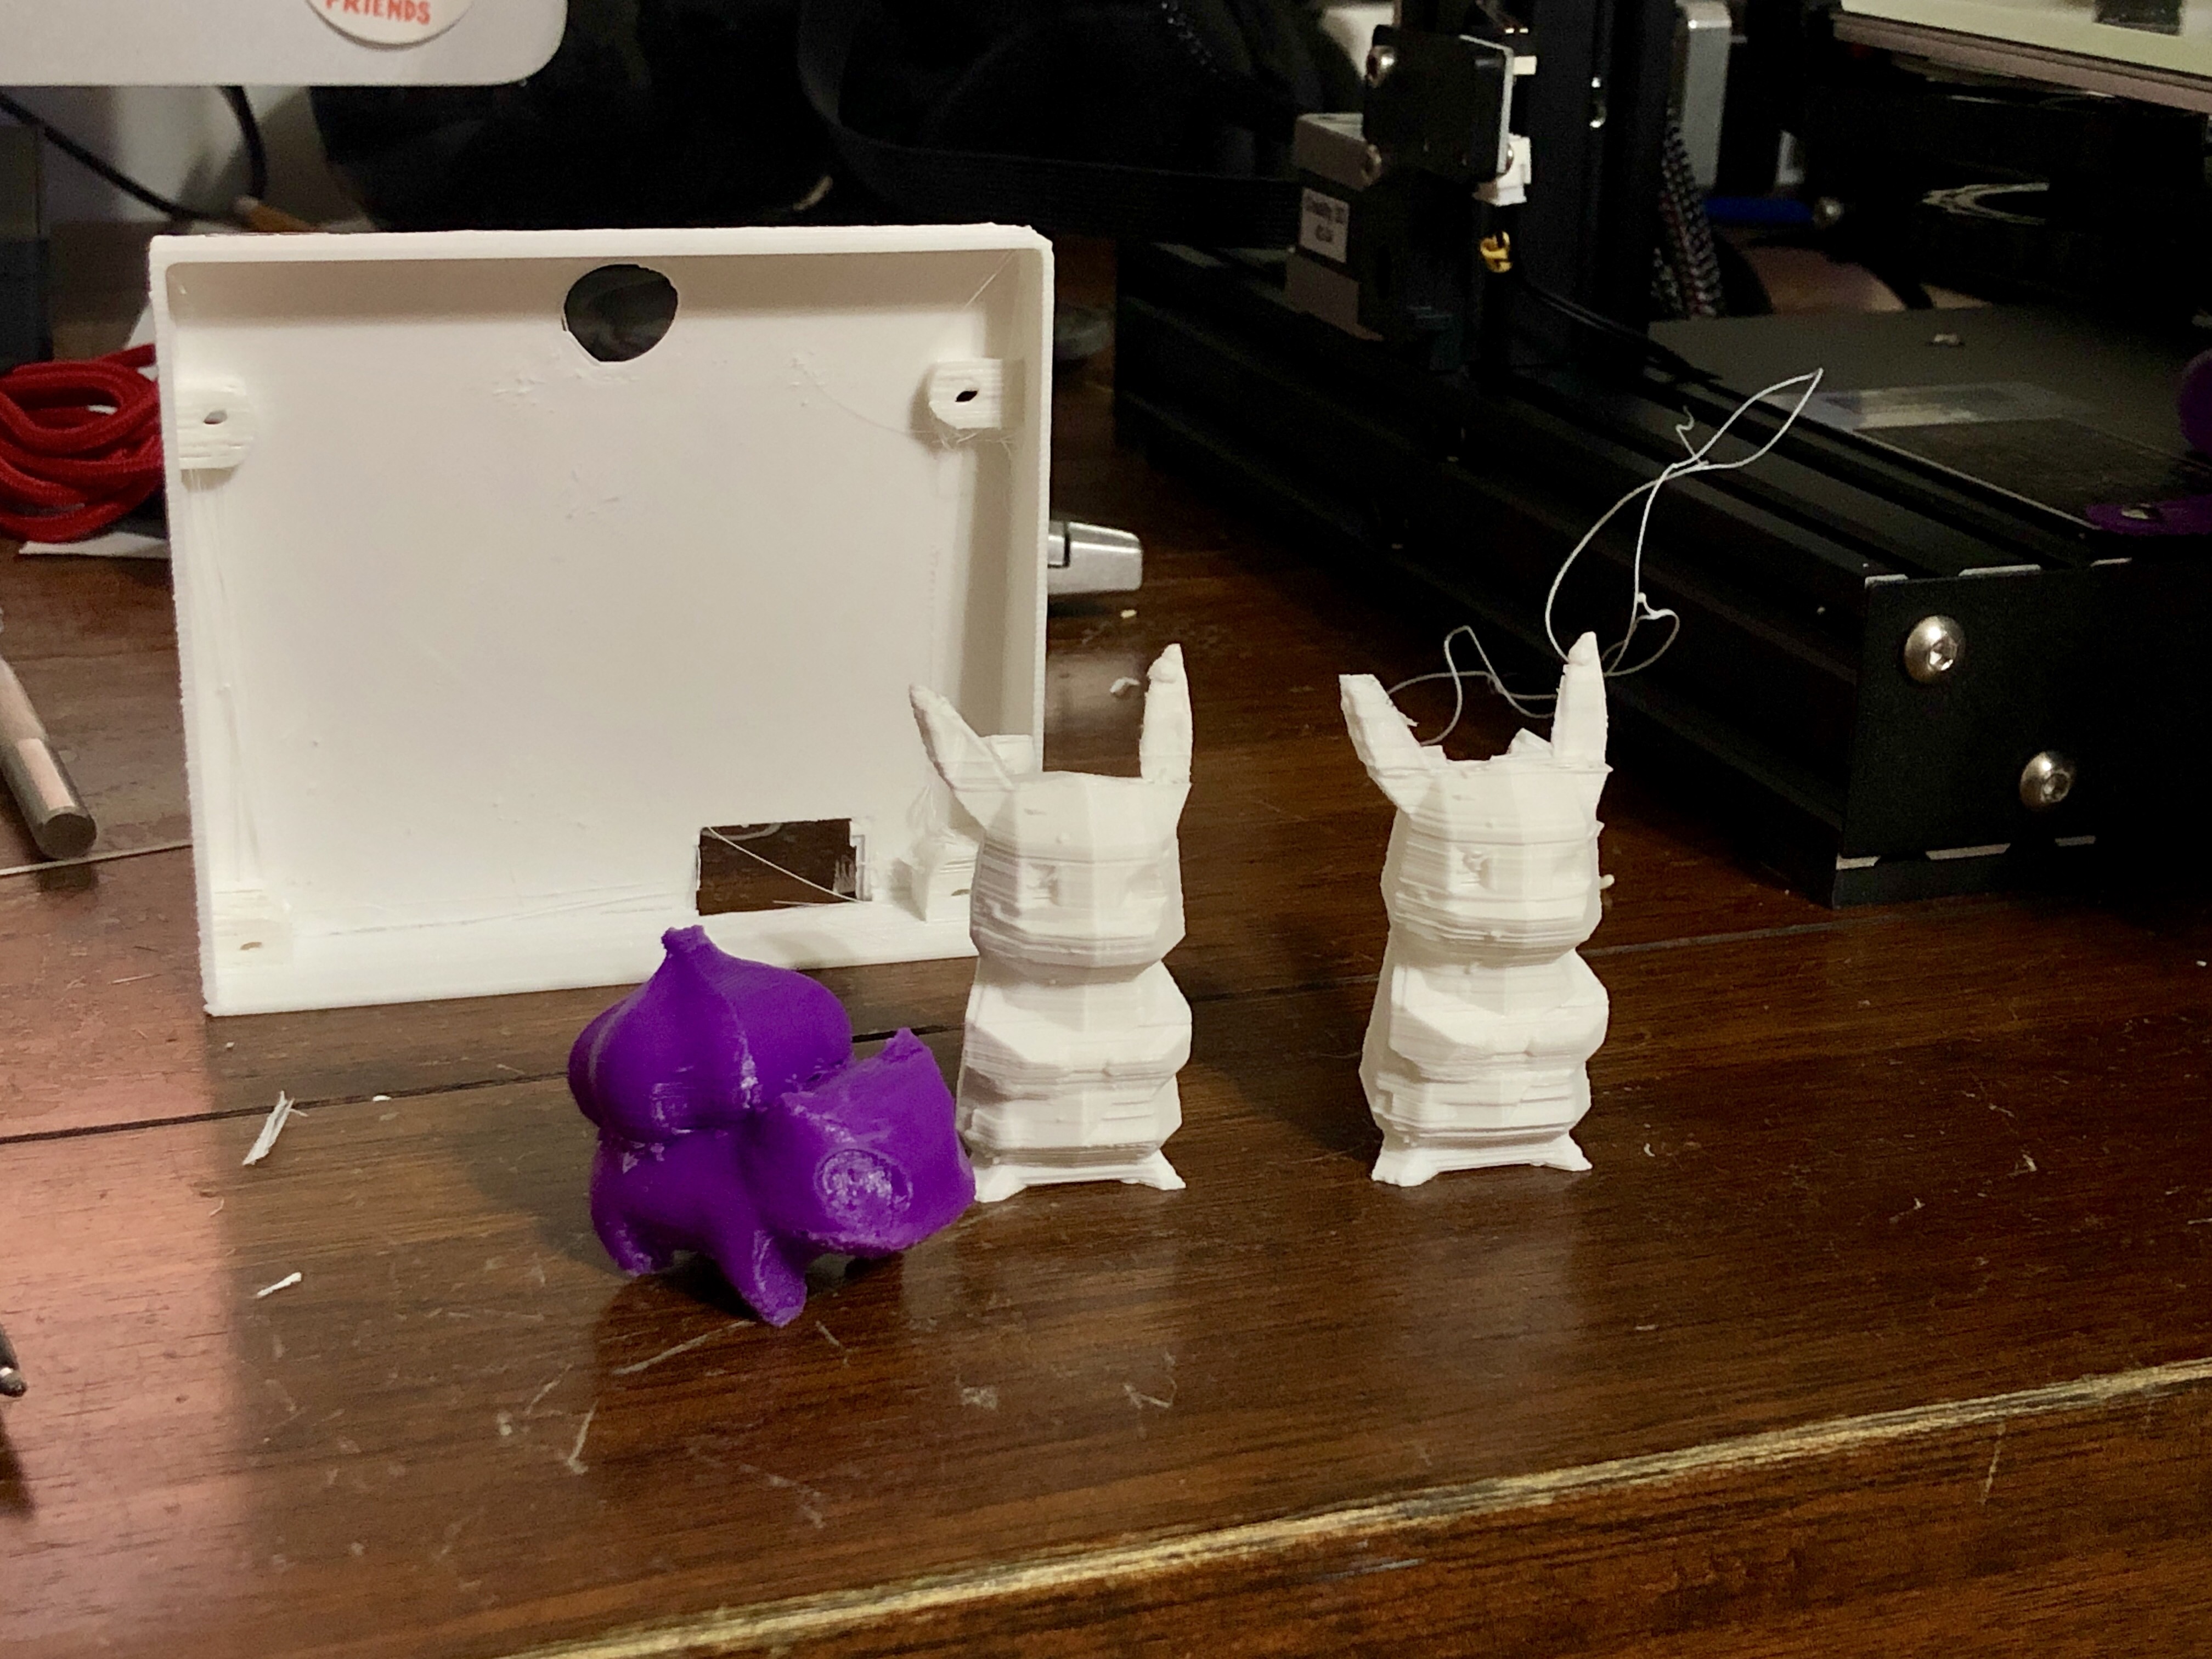 First prints from the Creality Ender 3